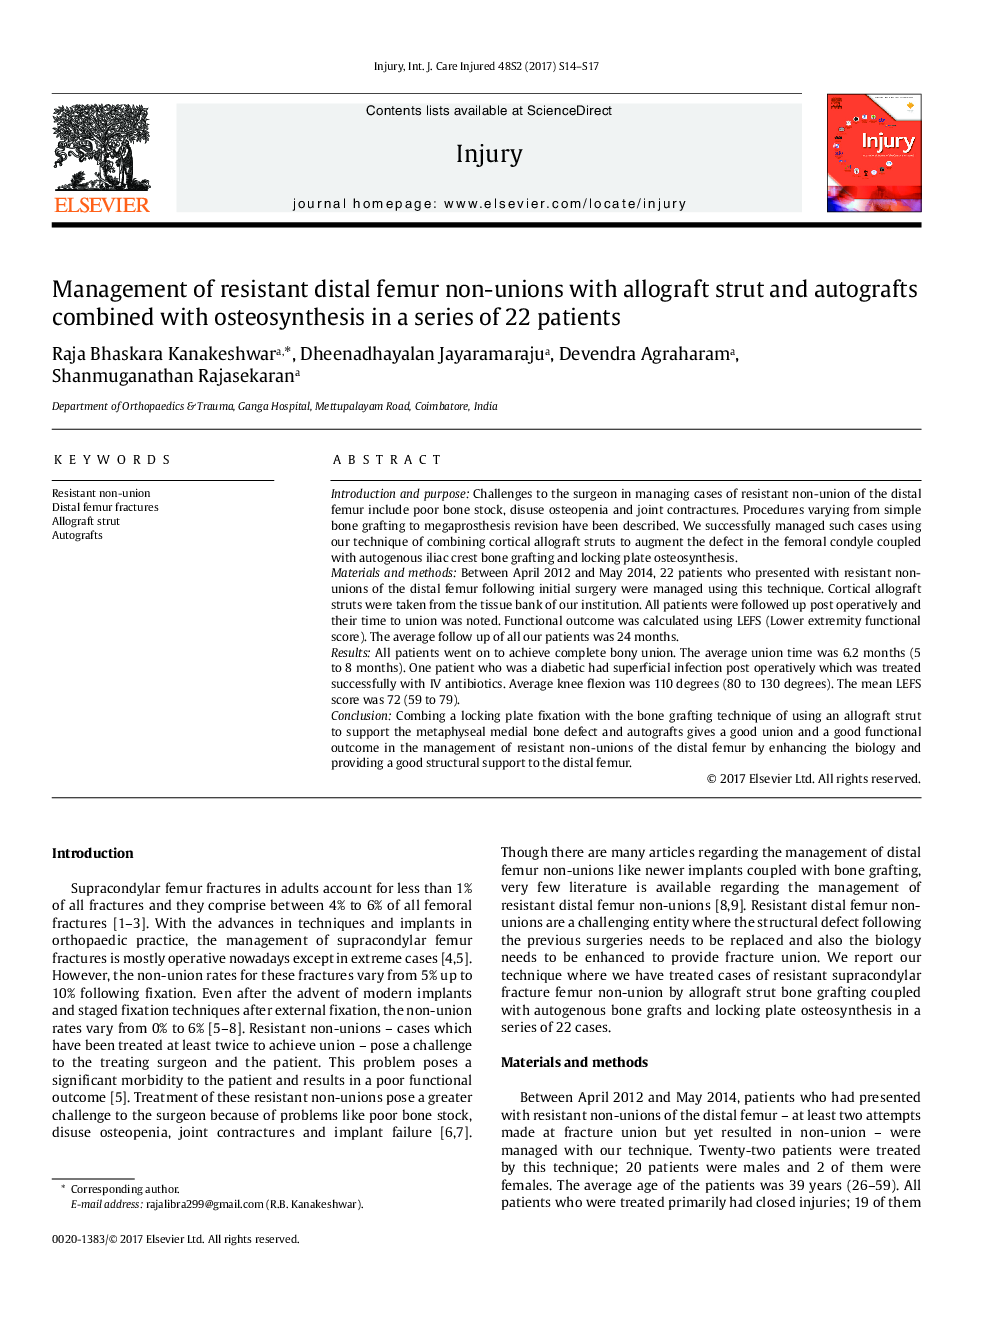 Management of resistant distal femur non-unions with allograft strut and autografts combined with osteosynthesis in a series of 22 patients